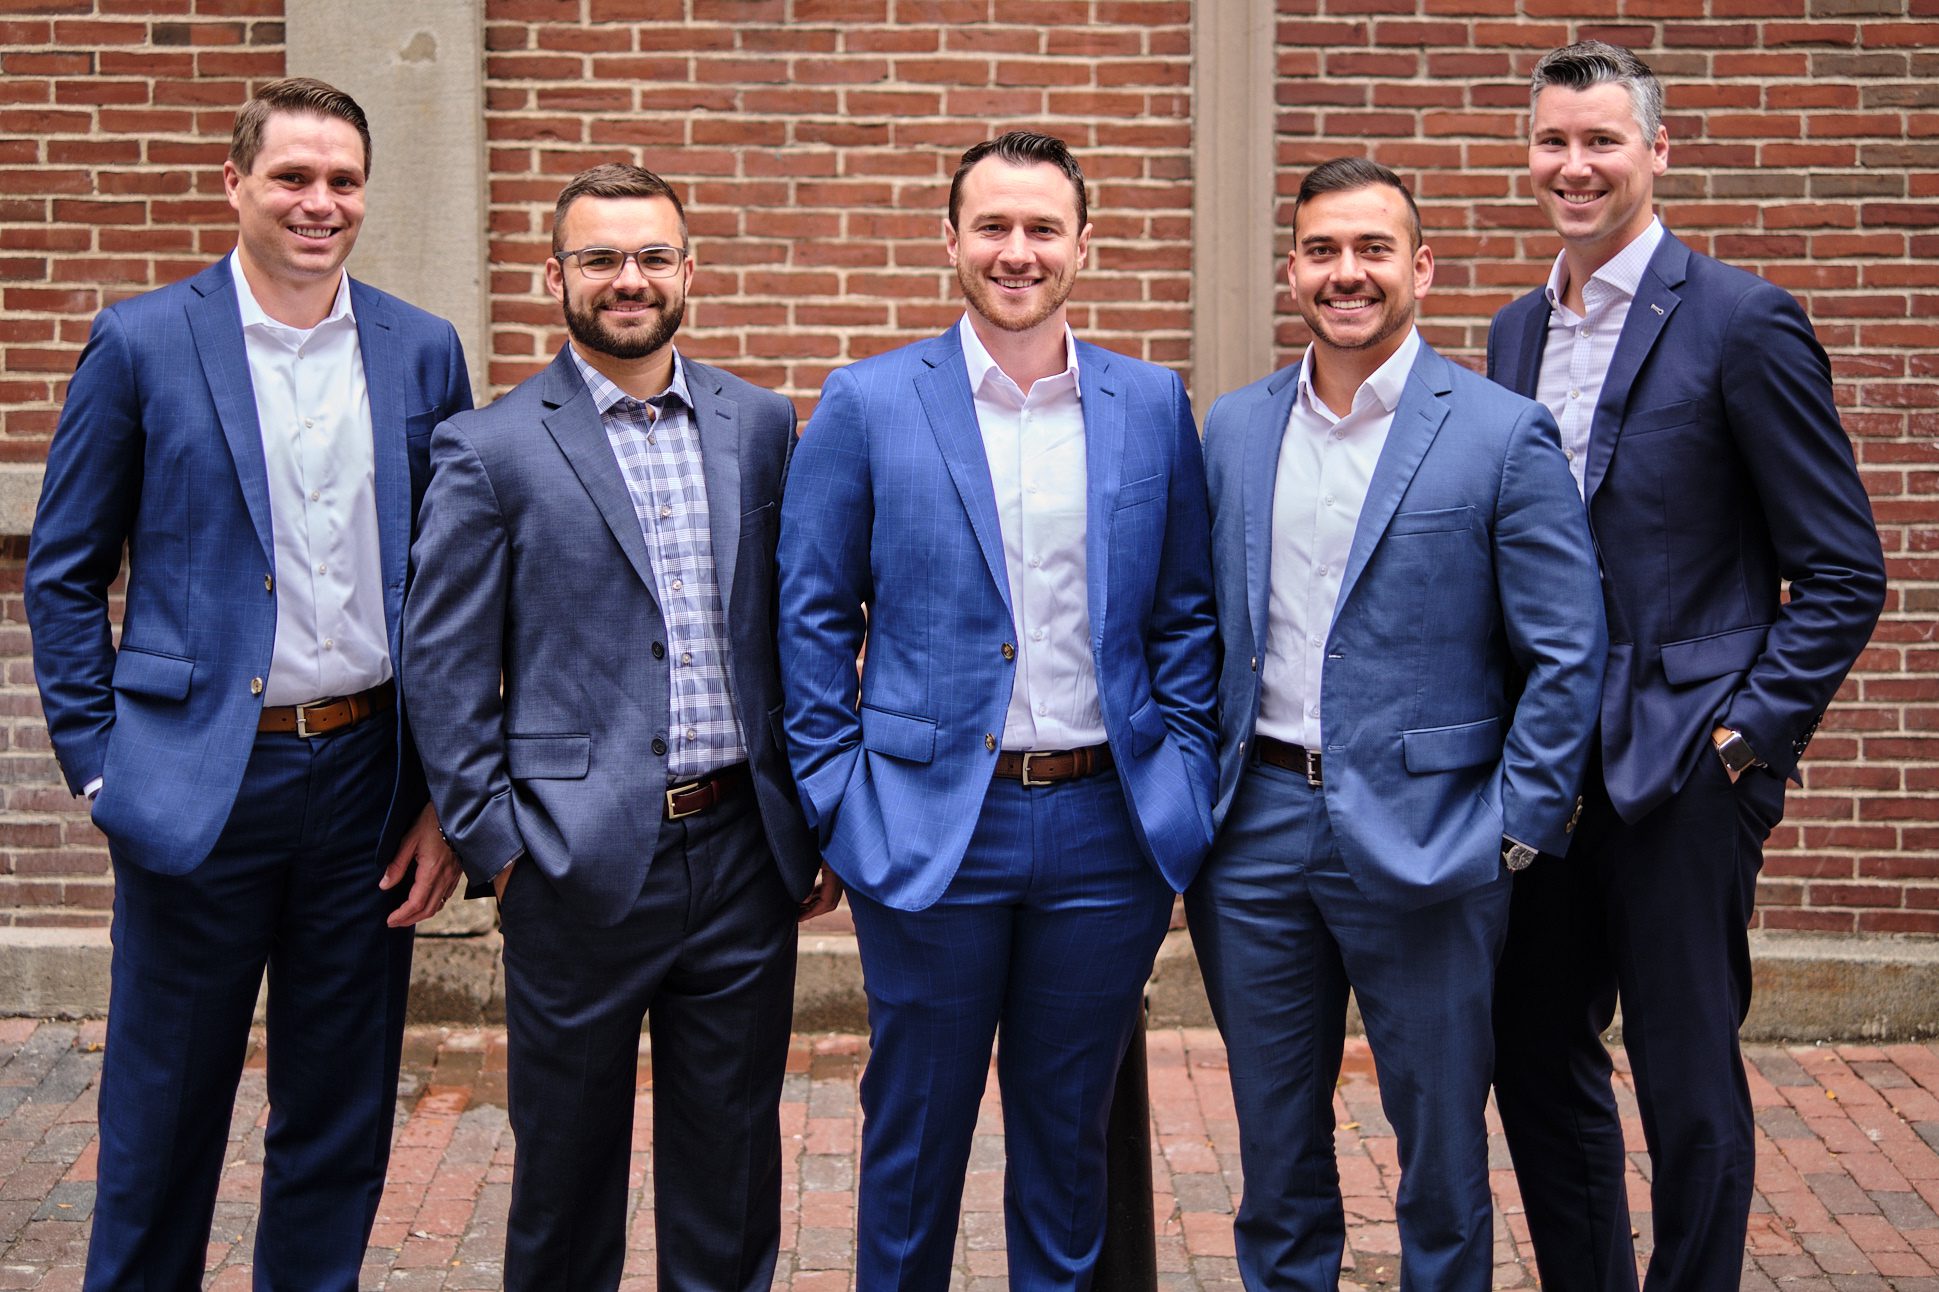 Wealth Management Firm in Boston - Our team